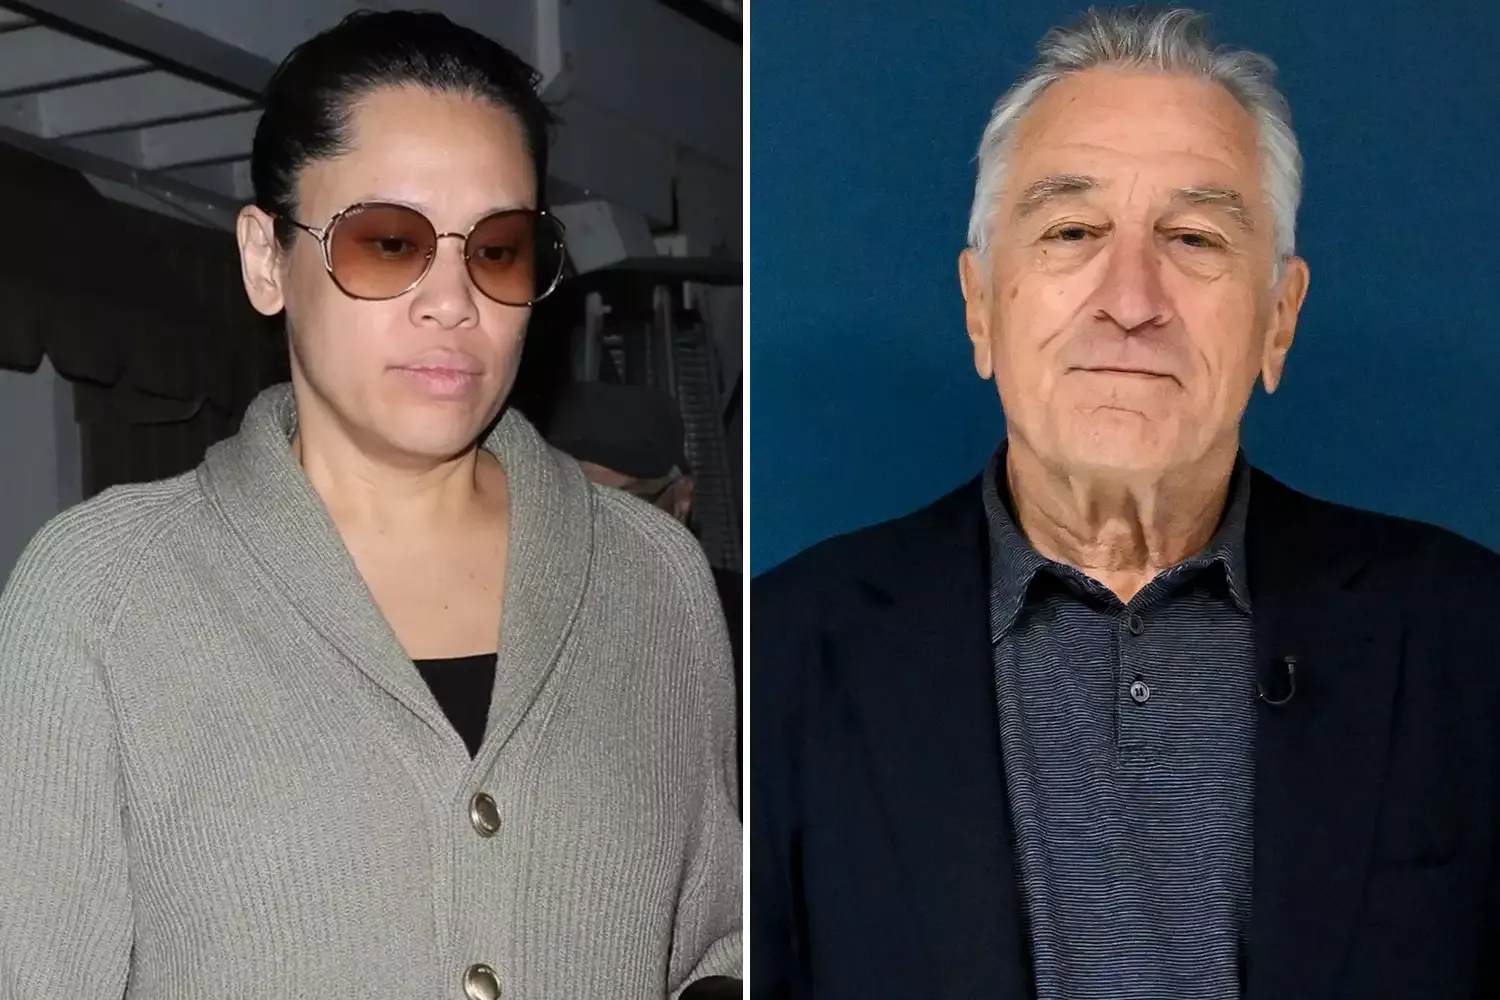 Robert De Niro's girlfriend Tiffany Chen reveals how she fell in love with the 79 year old actor